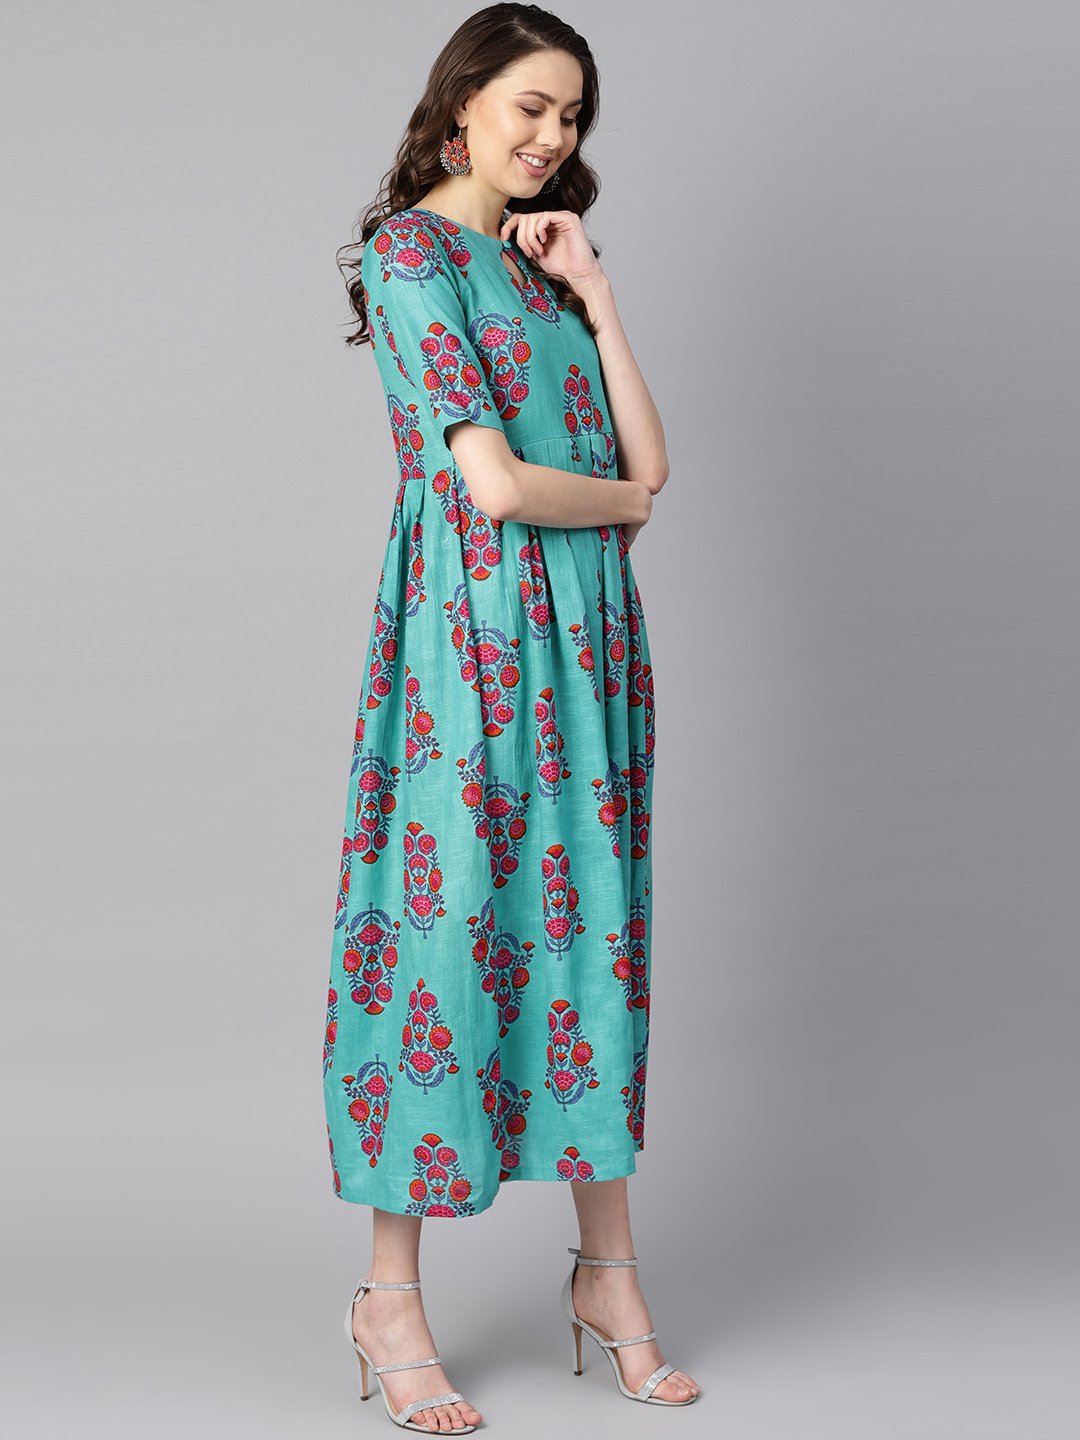 Women's Turqish Blue Color Printed Half Sleeve Pleated Maxi Dress With Deep Back And Tassel Detailing. - Nayo Clothing